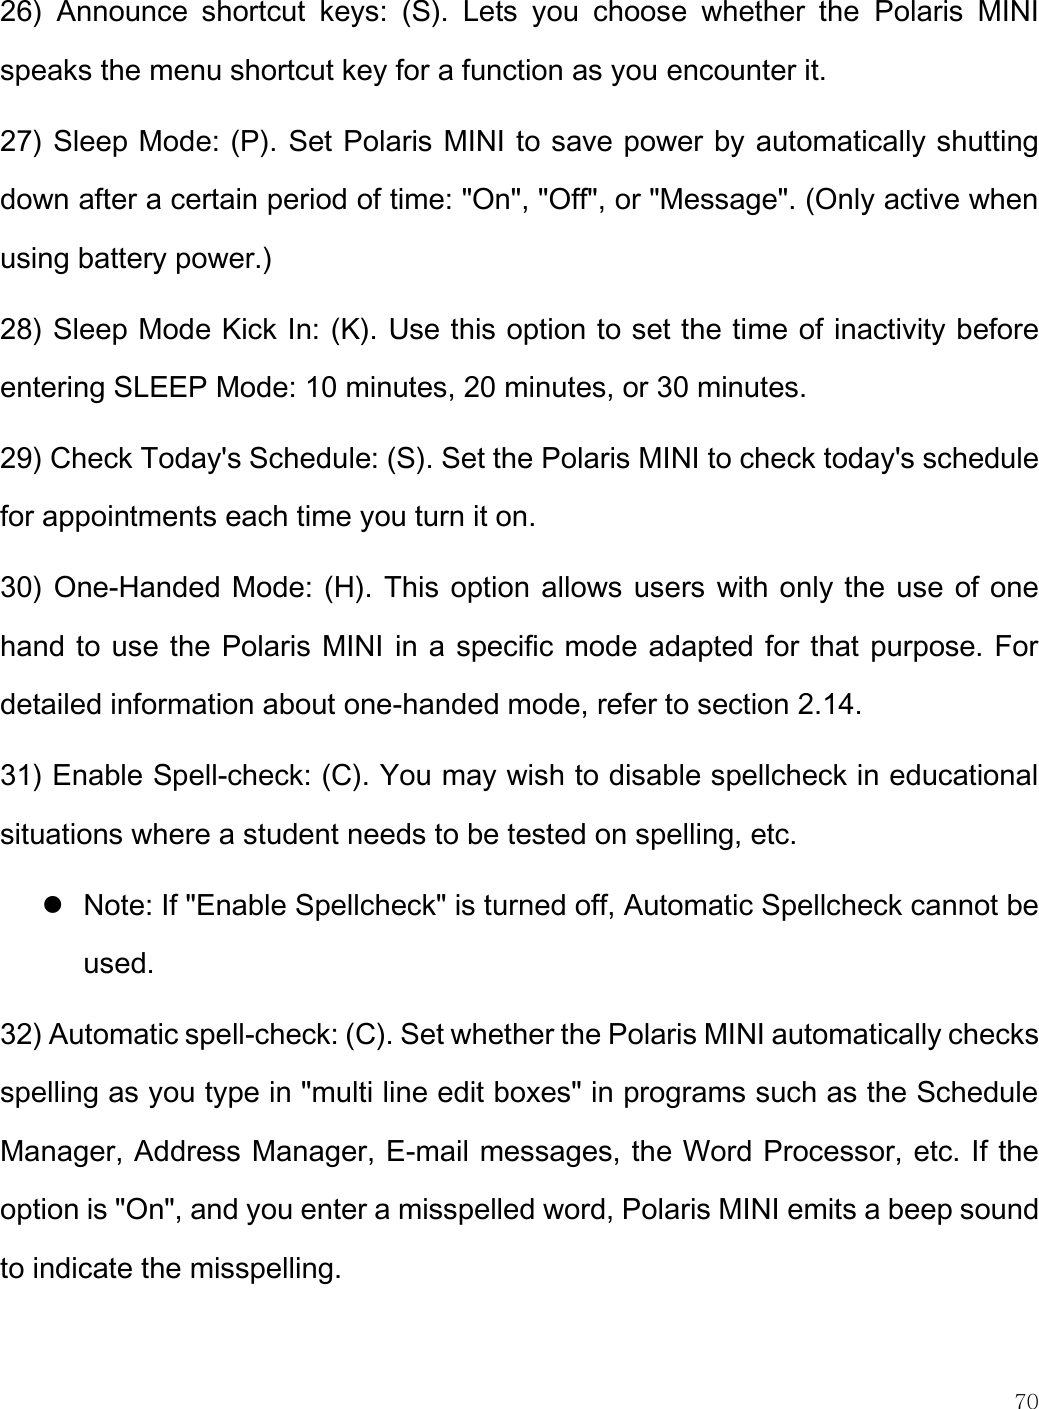    70  26)  Announce  shortcut  keys:  (S).  Lets  you  choose  whether  the  Polaris  MINI speaks the menu shortcut key for a function as you encounter it.  27) Sleep Mode: (P). Set Polaris MINI to save power by automatically shutting down after a certain period of time: &quot;On&quot;, &quot;Off&quot;, or &quot;Message&quot;. (Only active when using battery power.) 28) Sleep Mode Kick In: (K). Use this option to set the time of inactivity before entering SLEEP Mode: 10 minutes, 20 minutes, or 30 minutes. 29) Check Today&apos;s Schedule: (S). Set the Polaris MINI to check today&apos;s schedule for appointments each time you turn it on.  30) One-Handed Mode: (H). This option allows users with only the use of one hand to use the Polaris MINI in a specific mode adapted for that purpose. For detailed information about one-handed mode, refer to section 2.14.  31) Enable Spell-check: (C). You may wish to disable spellcheck in educational situations where a student needs to be tested on spelling, etc.  Note: If &quot;Enable Spellcheck&quot; is turned off, Automatic Spellcheck cannot be used. 32) Automatic spell-check: (C). Set whether the Polaris MINI automatically checks spelling as you type in &quot;multi line edit boxes&quot; in programs such as the Schedule Manager, Address Manager, E-mail messages, the Word Processor, etc. If the option is &quot;On&quot;, and you enter a misspelled word, Polaris MINI emits a beep sound to indicate the misspelling.  